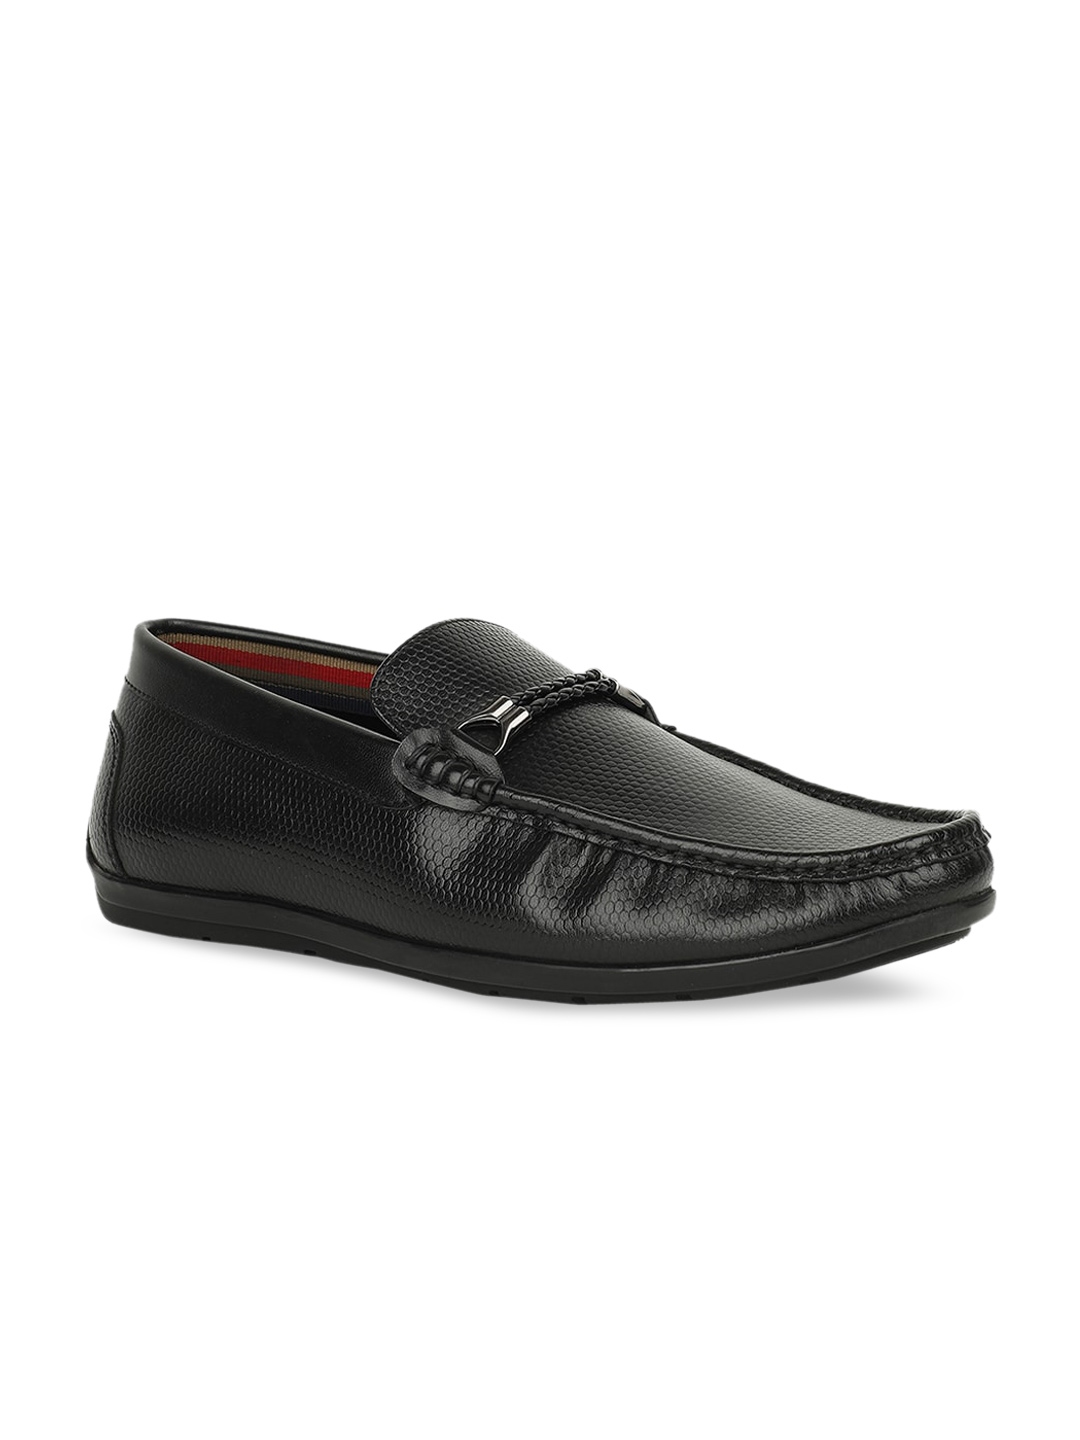 Buy Bata Men Black Textured Loafers - Casual Shoes for Men 17002472 ...